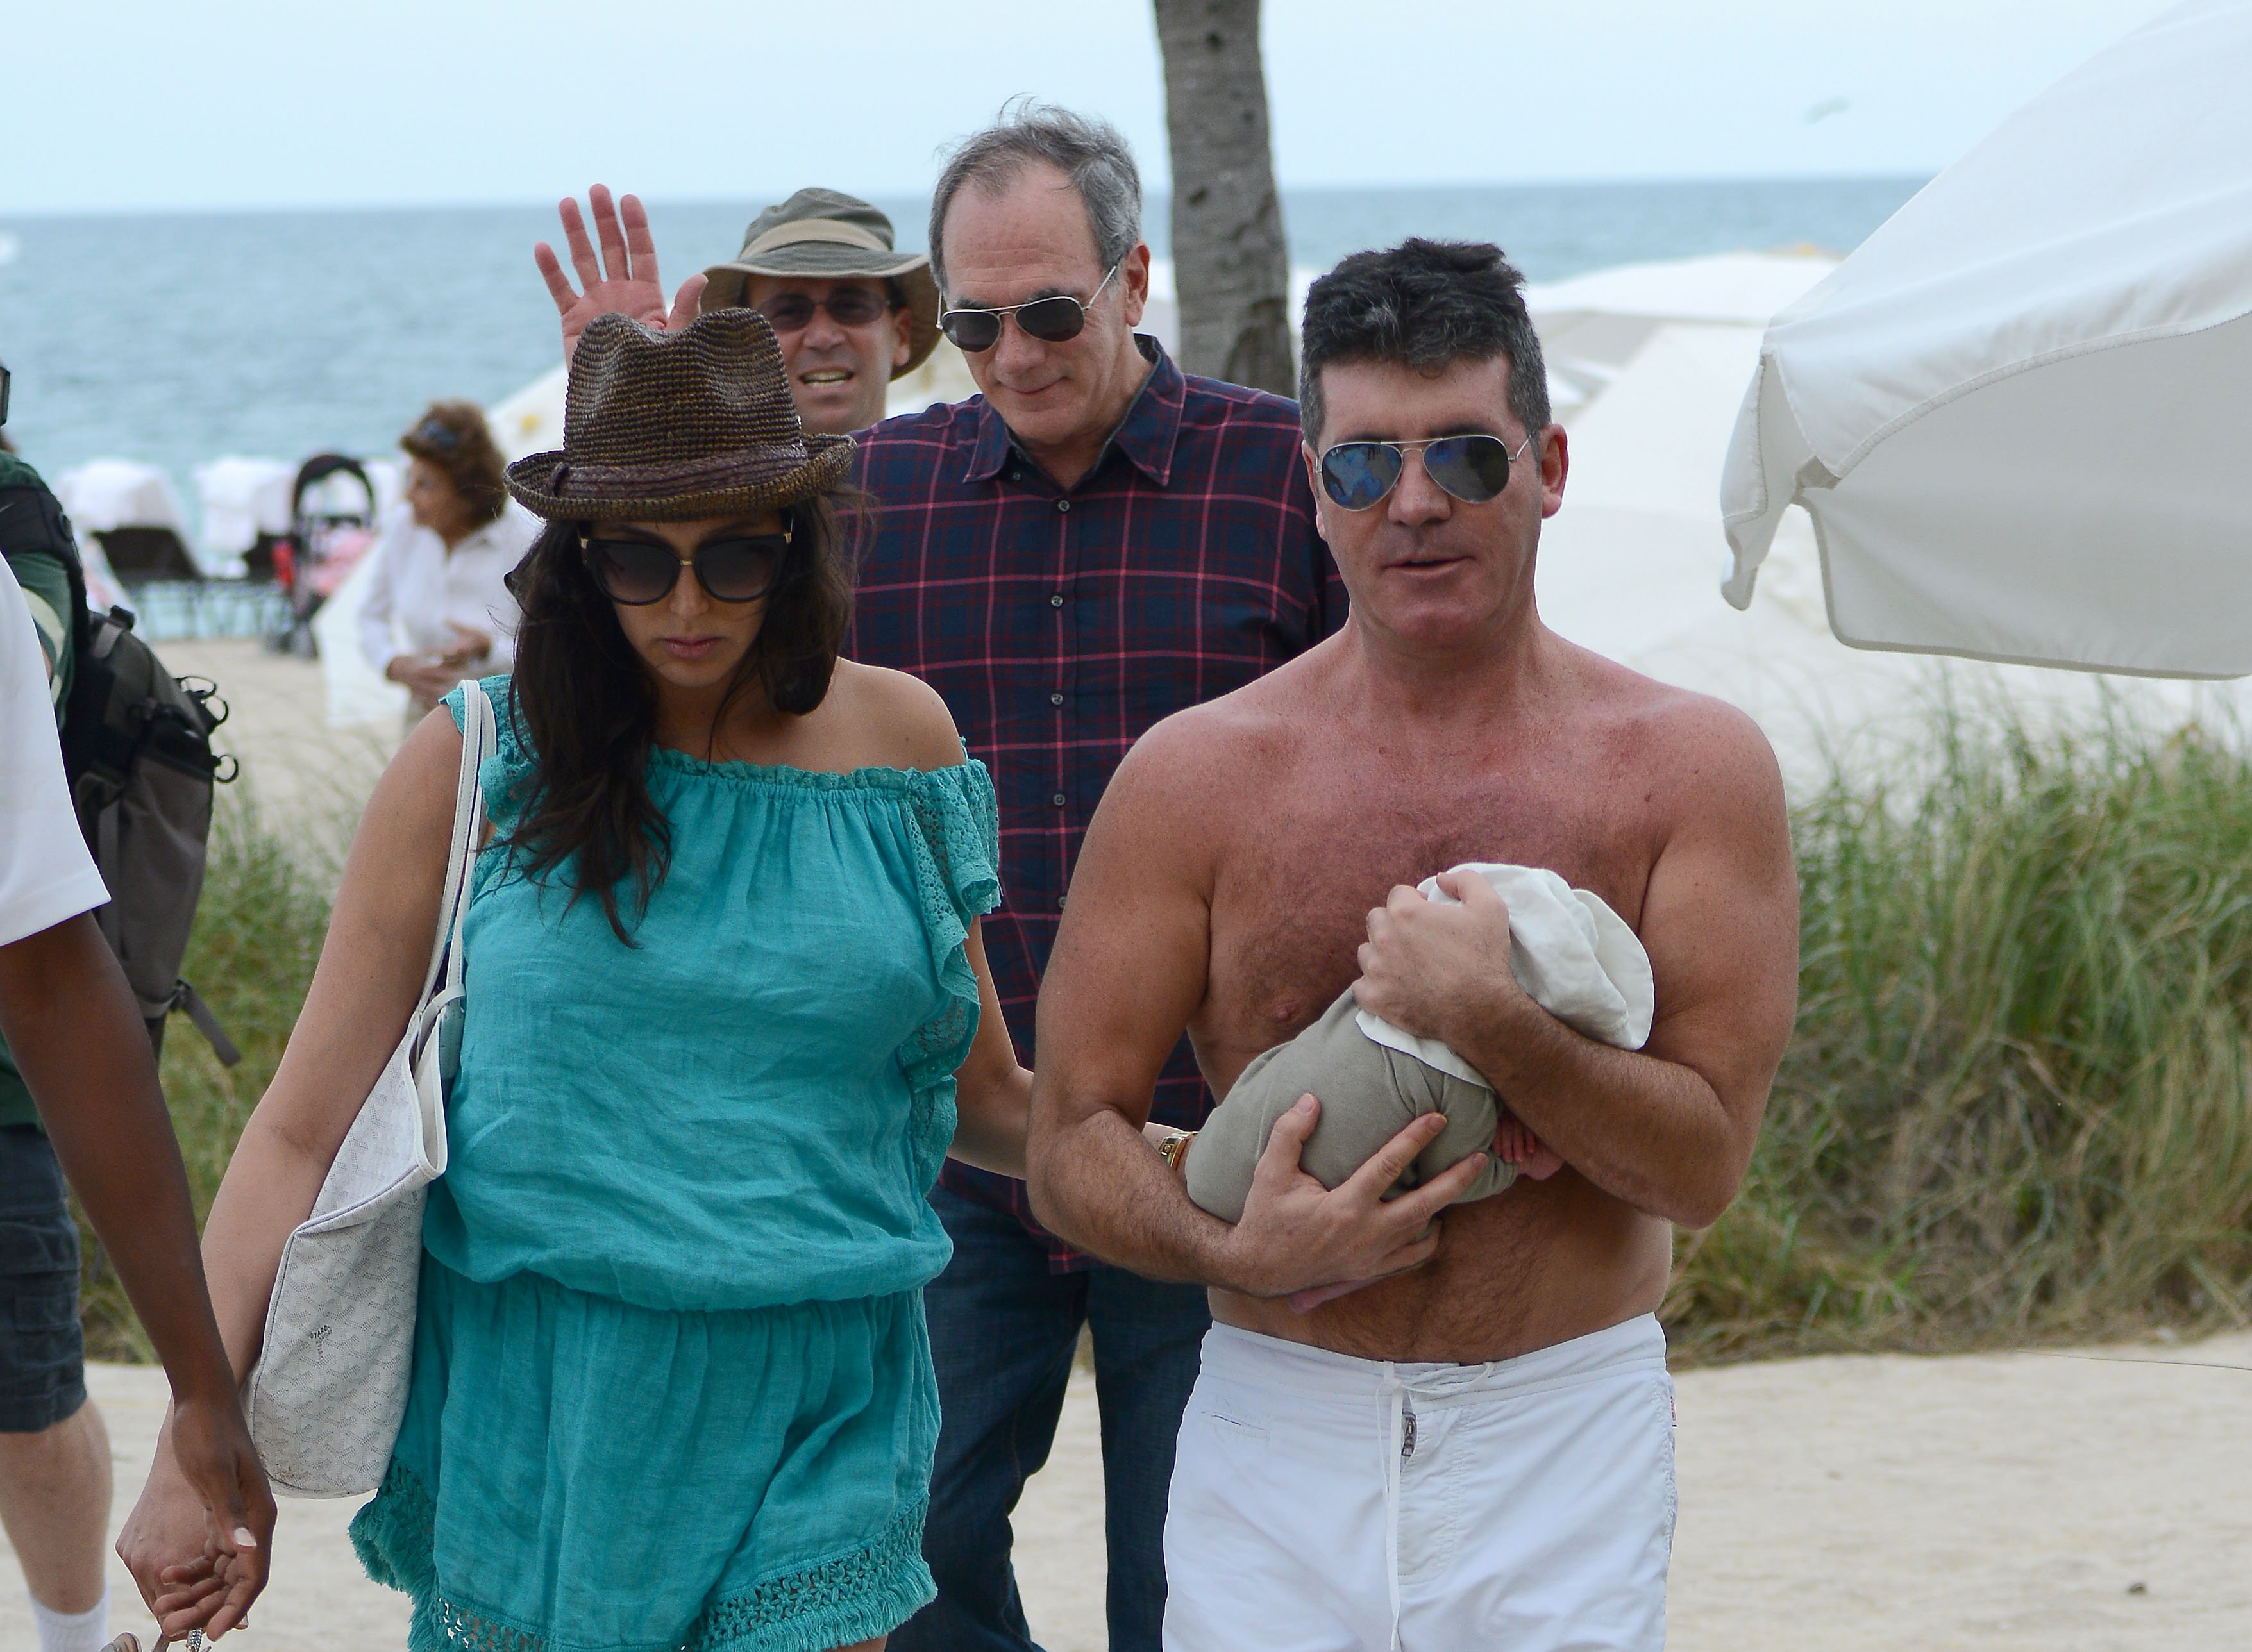 Simon Cowell and Lauren Silverman are seen with their newborn son, Eric Cowell, while at the beach on February 24, 2014 in Miami, Florida. | Source: Getty Images